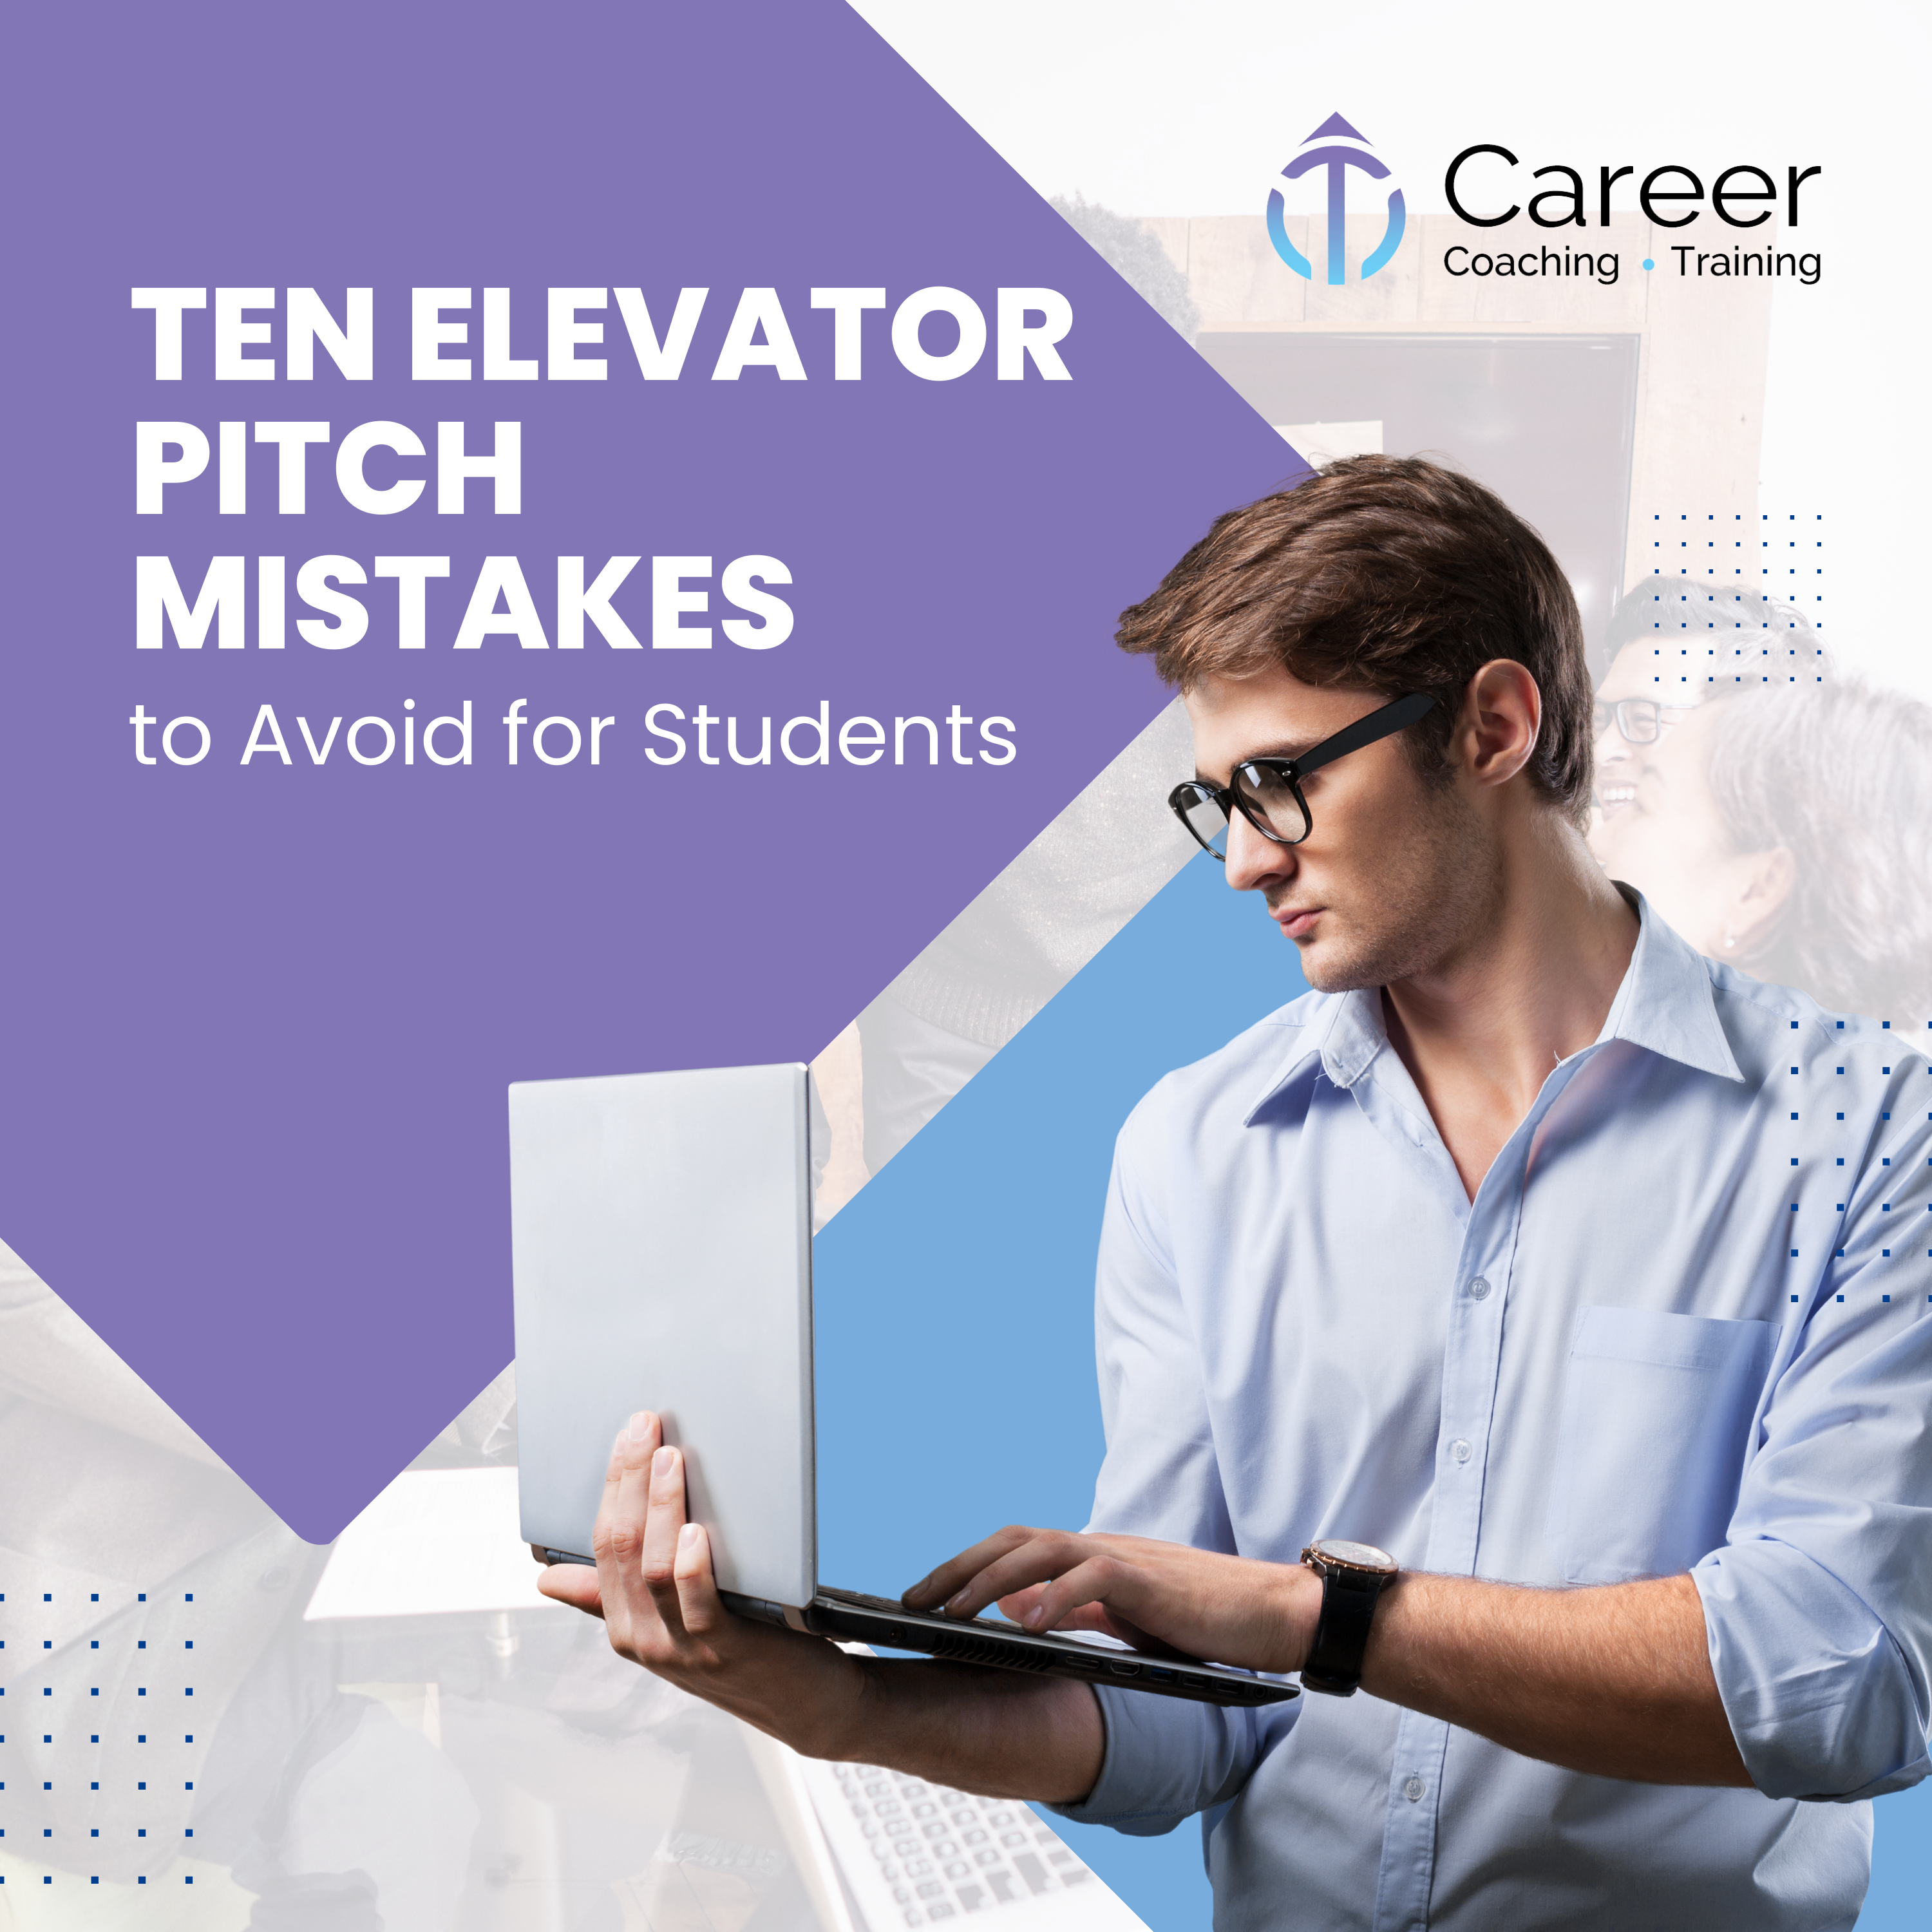 Ten Elevator Pitch Mistakes to Avoid for Students